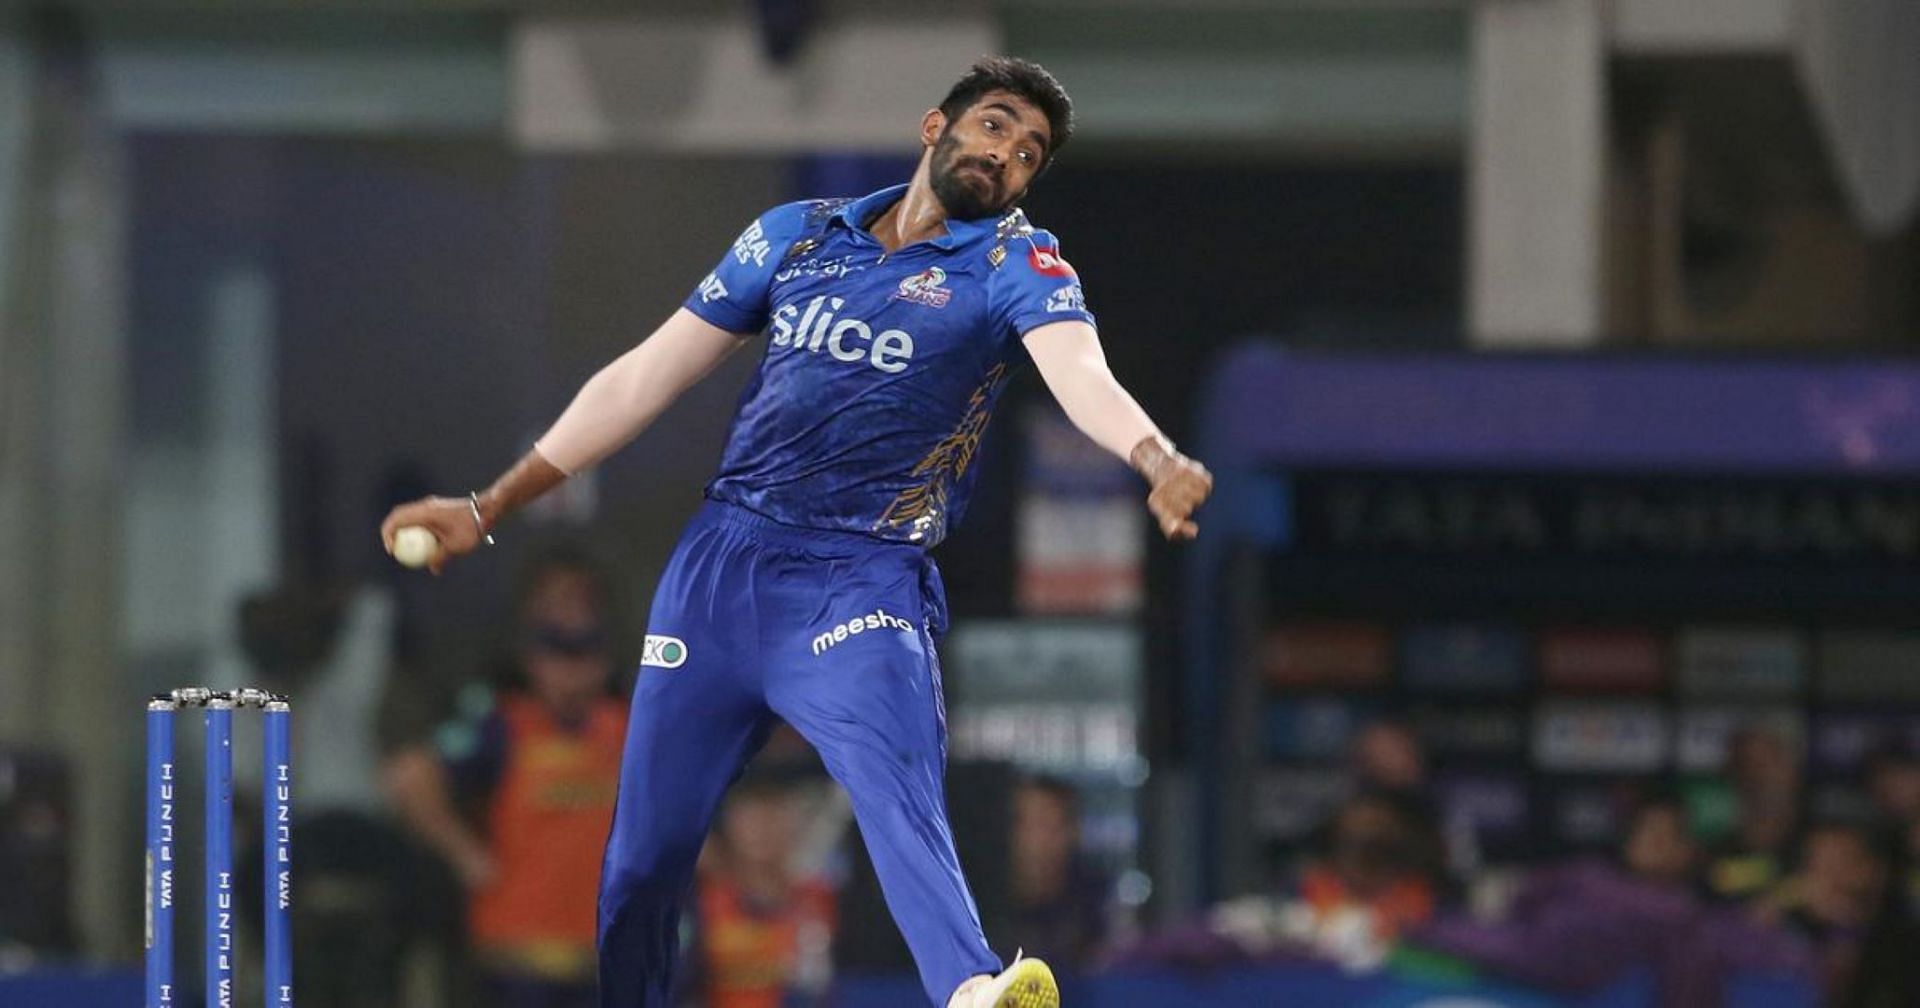 Mumbai Indians will be without their spearhead for IPL 2023